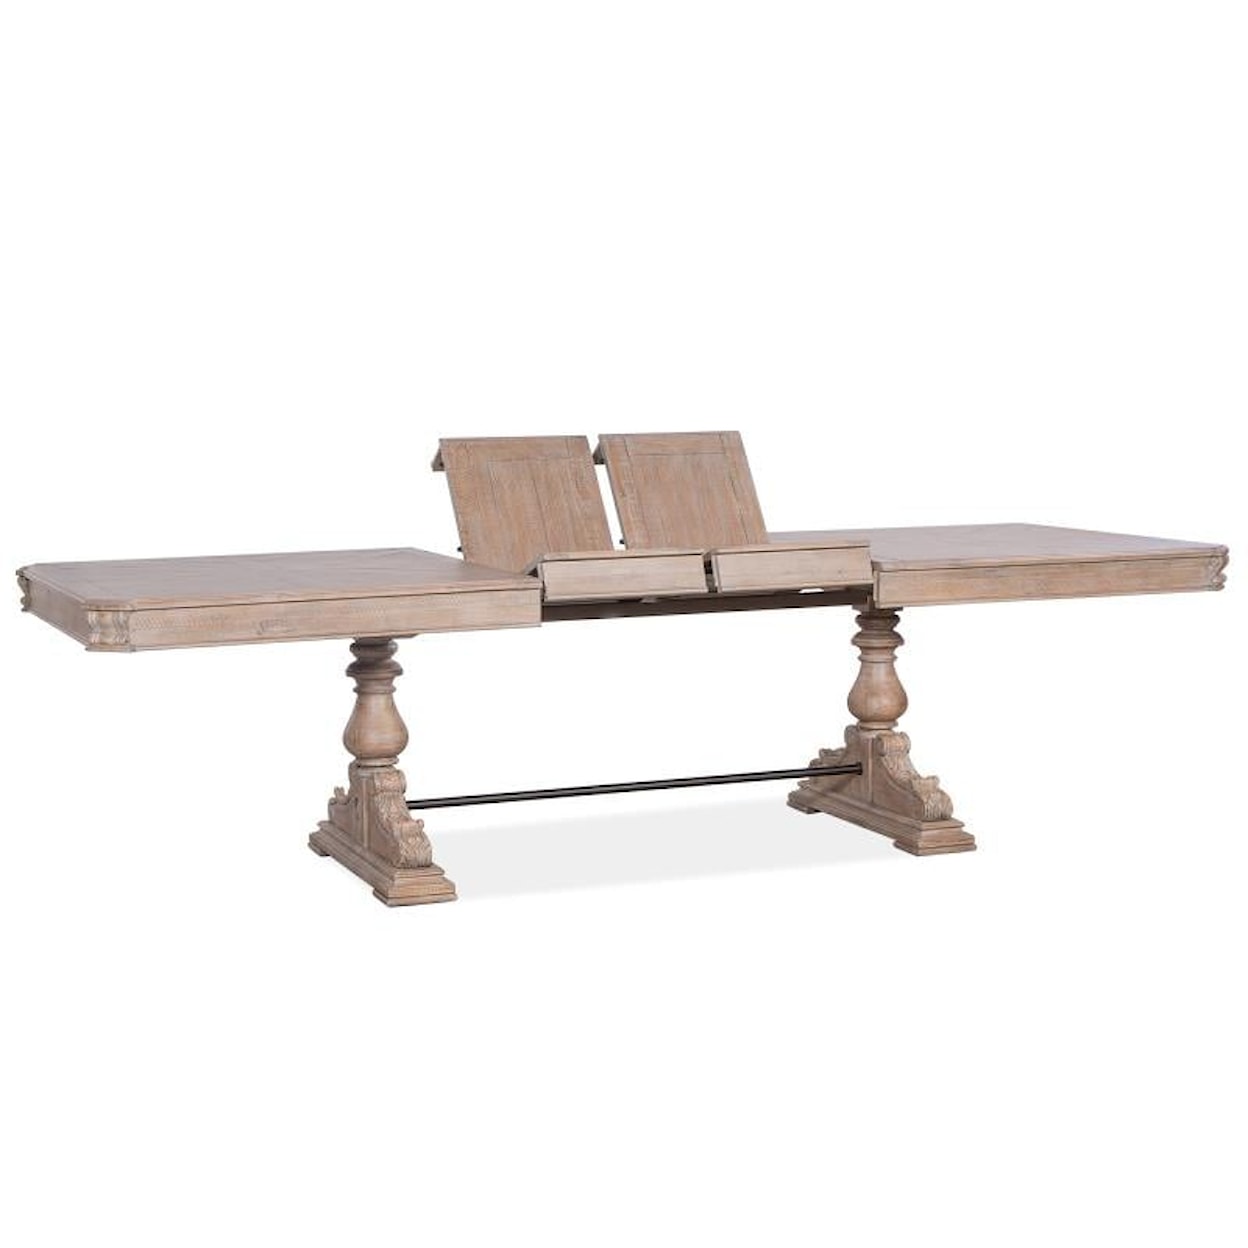 Magnussen Home Marisol Dining Trestle Dining Table